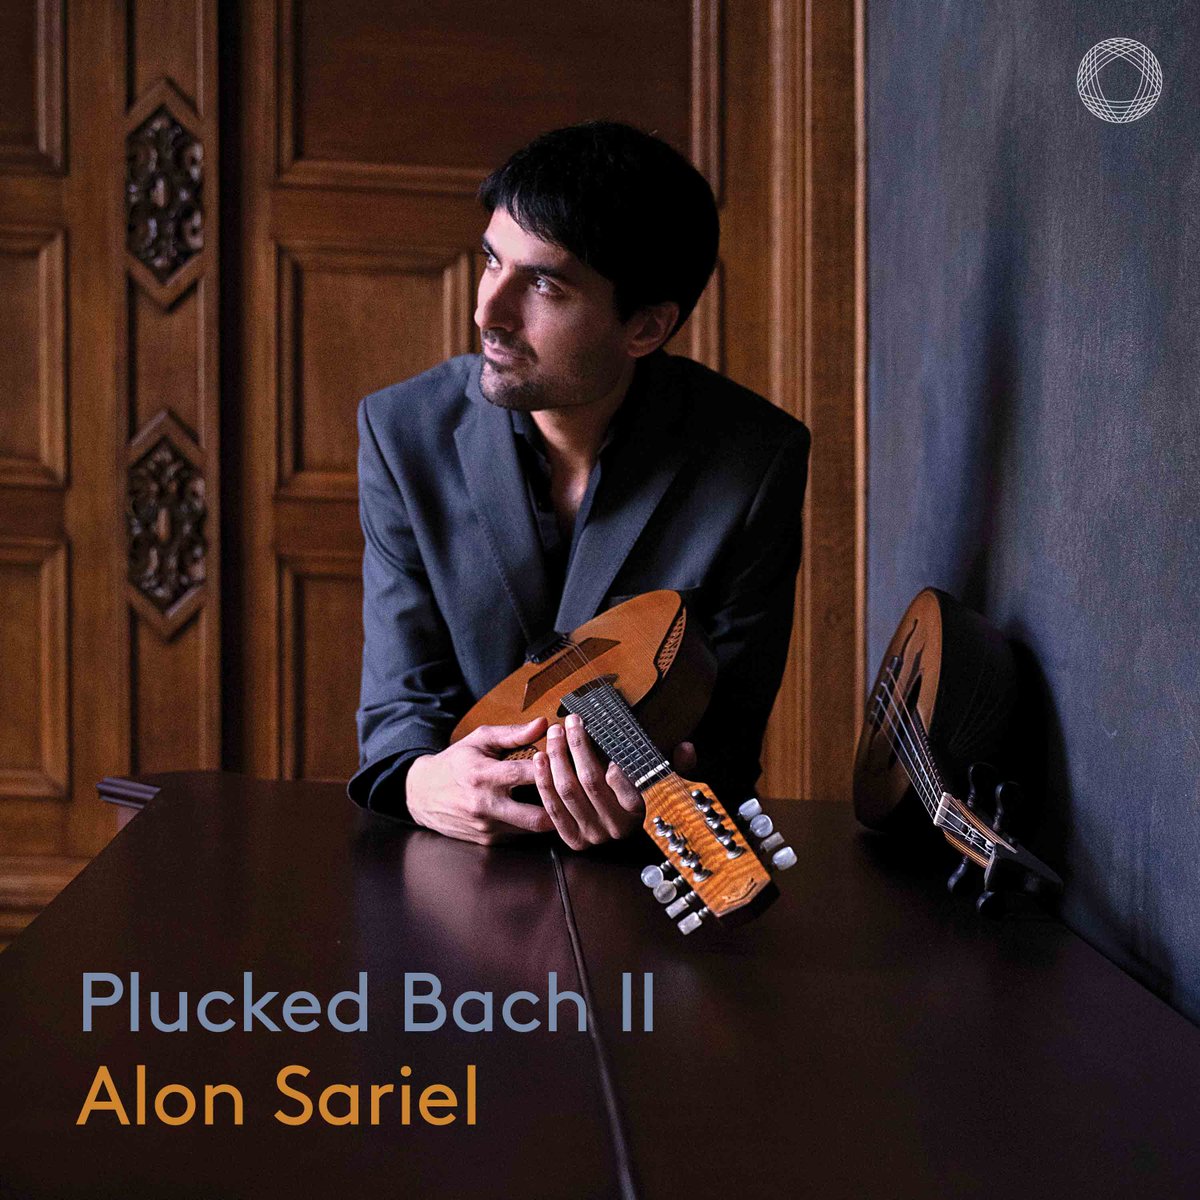 'Plucked Bach II', performed by Alon Sariel, received an outstanding review from @GramophoneMag! Listen to the album now on @AppleMusic, @Spotify, @idagio_official, and more! 🎶lnk.to/pluckedBachII